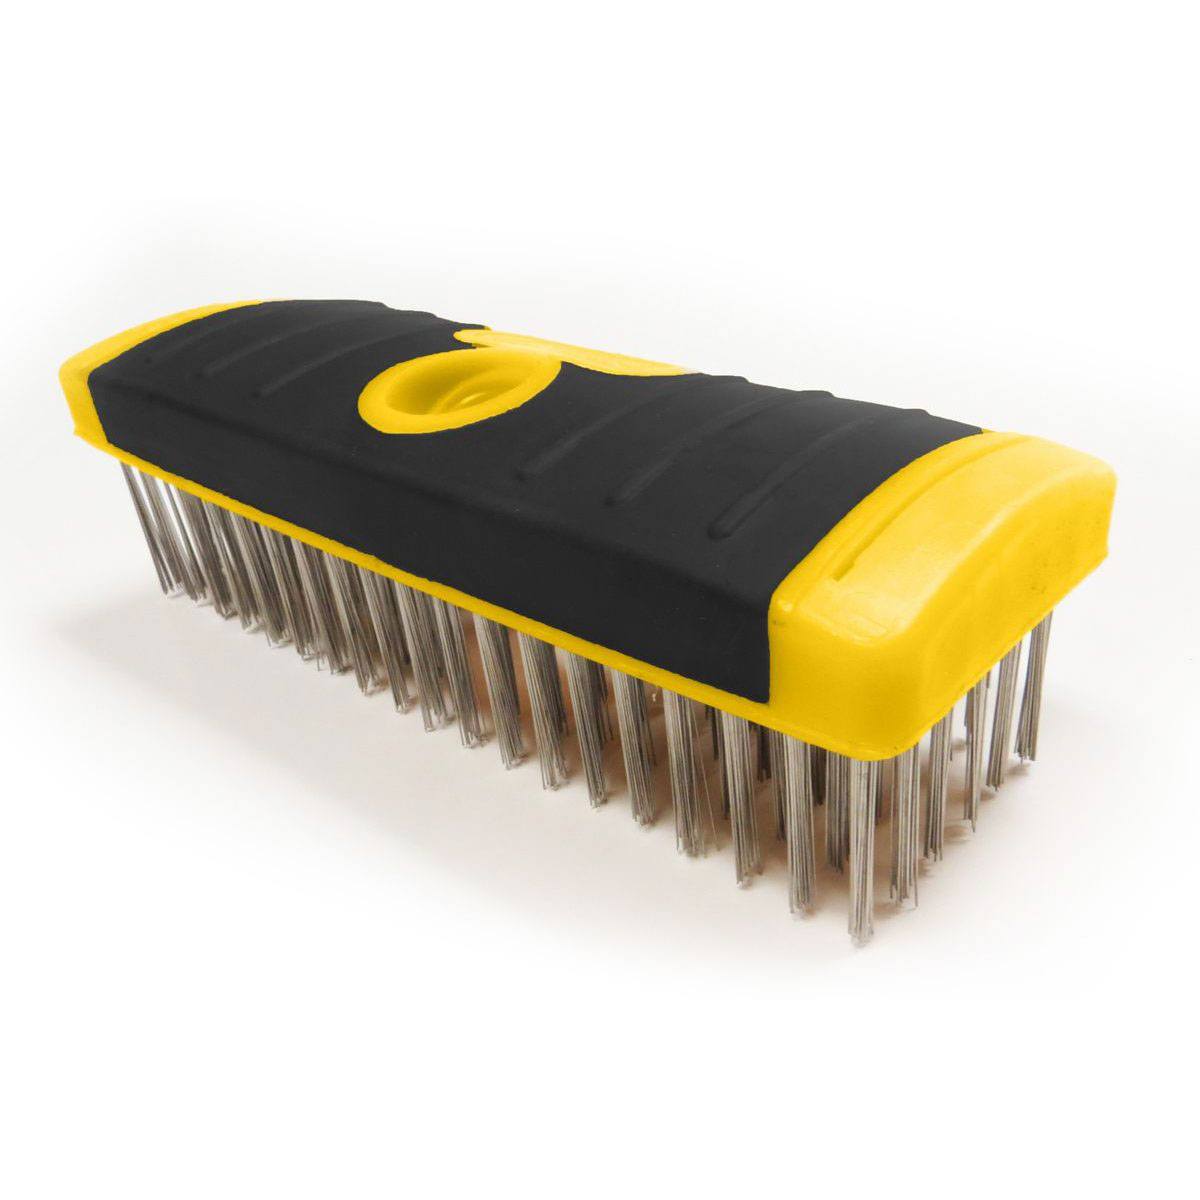 SBR2) Small Scrub Brush, Labelled » ALLWAY® The Tools You Ask For By Name